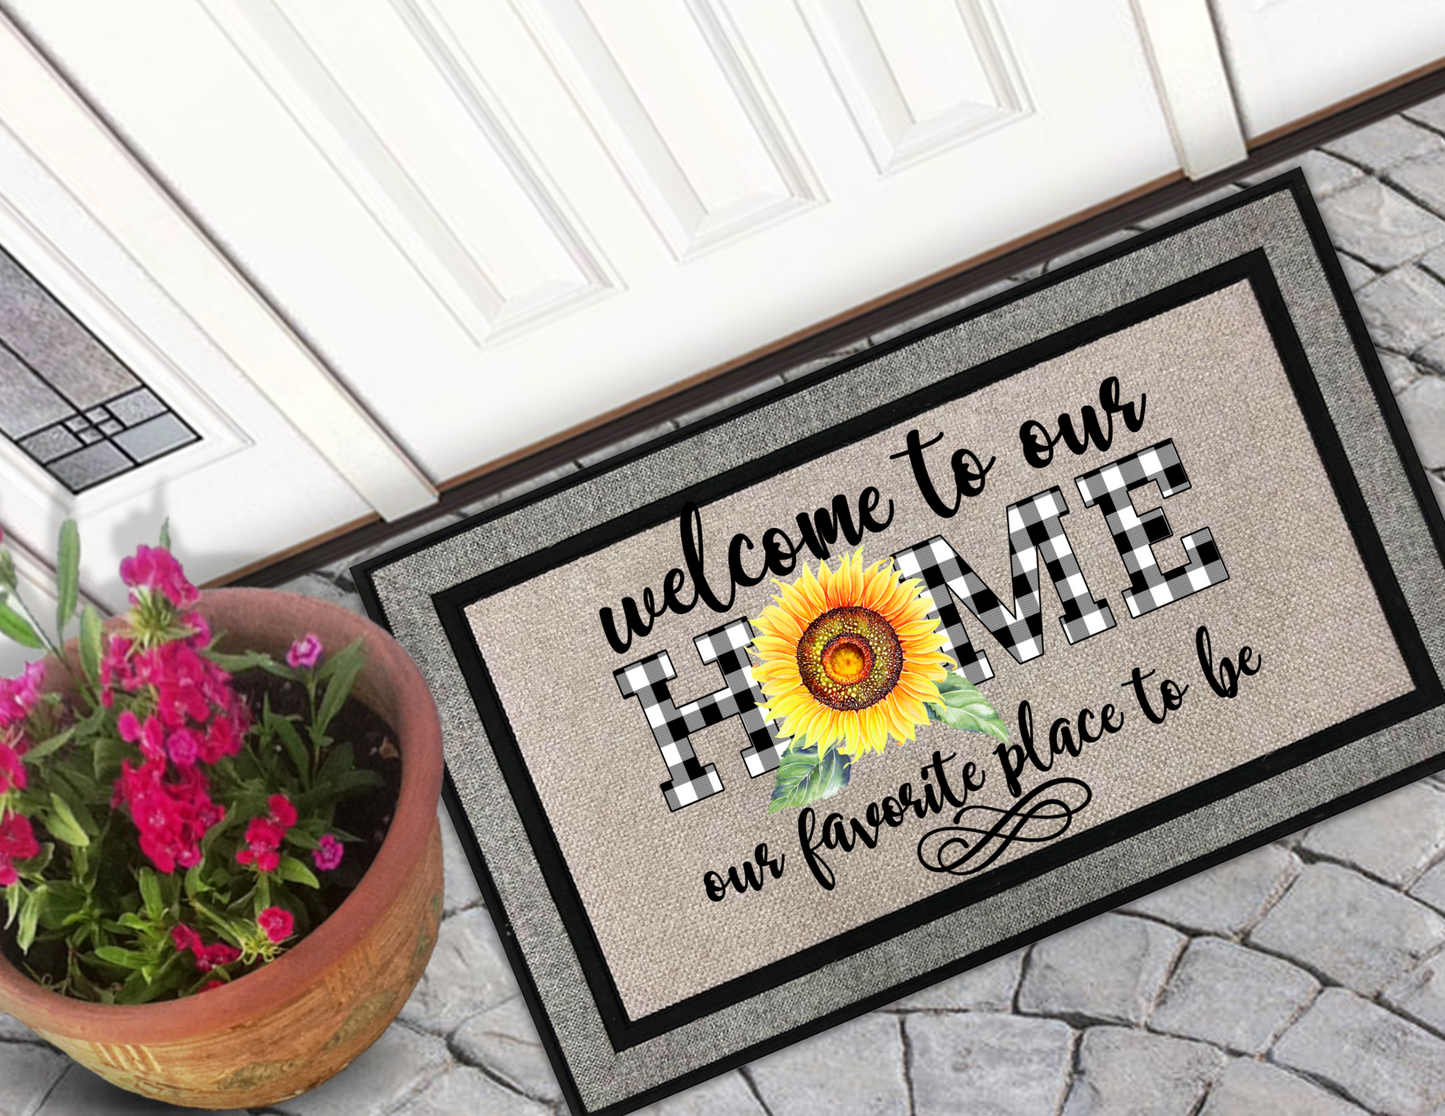 Welcome to Our Home Door Mat